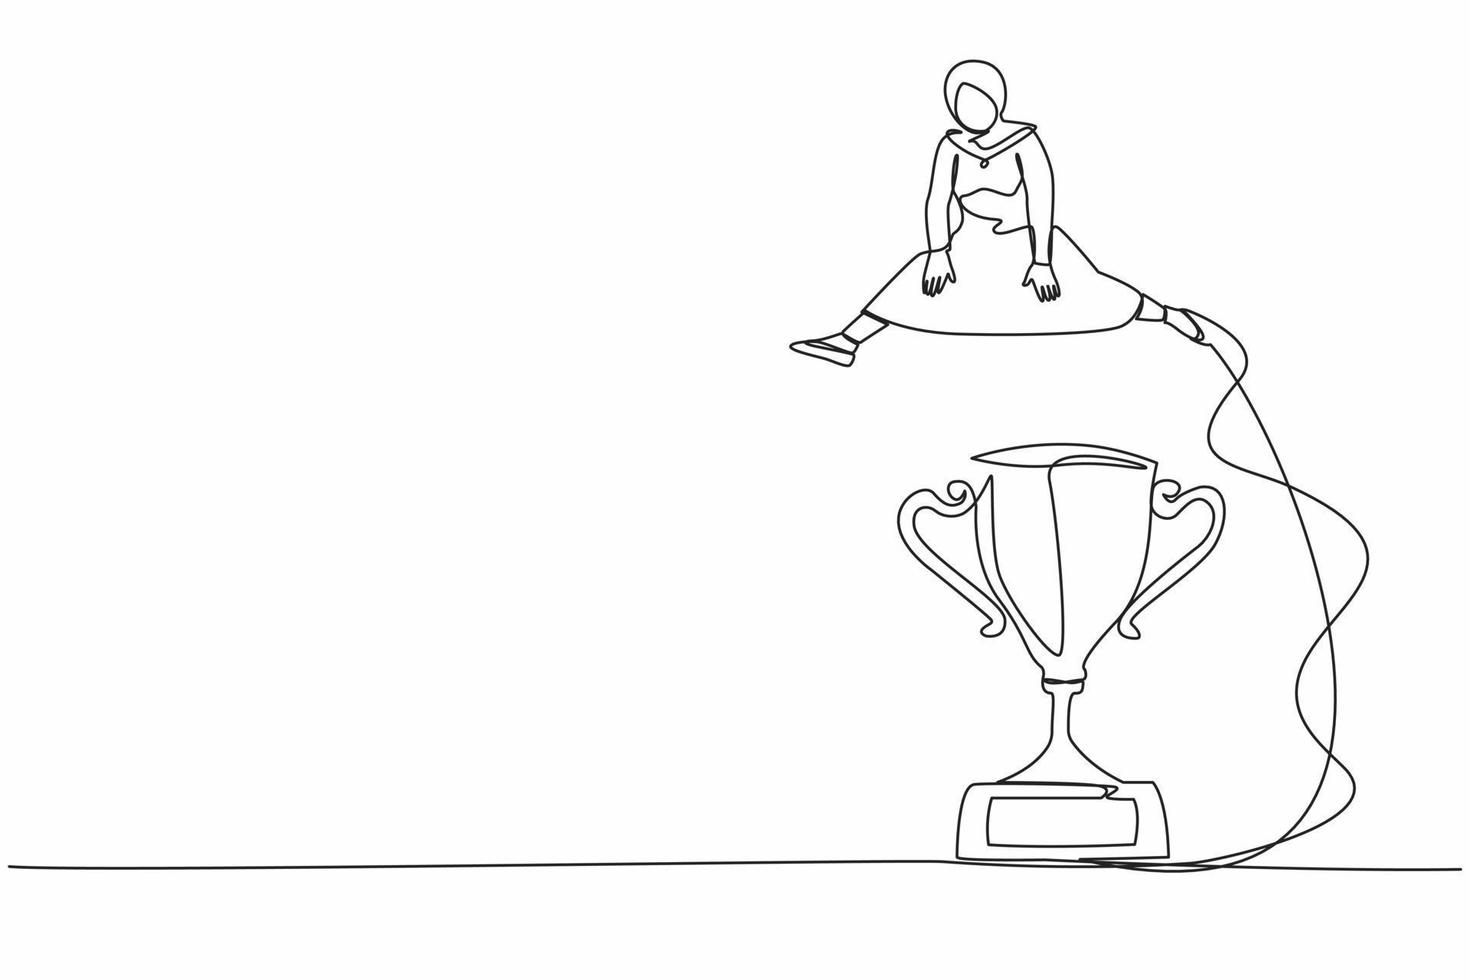 Continuous one line drawing Arabian businesswoman jumping over big trophy. Challenge or succeed in business competition. Celebrate work achievement. Single line draw design vector graphic illustration